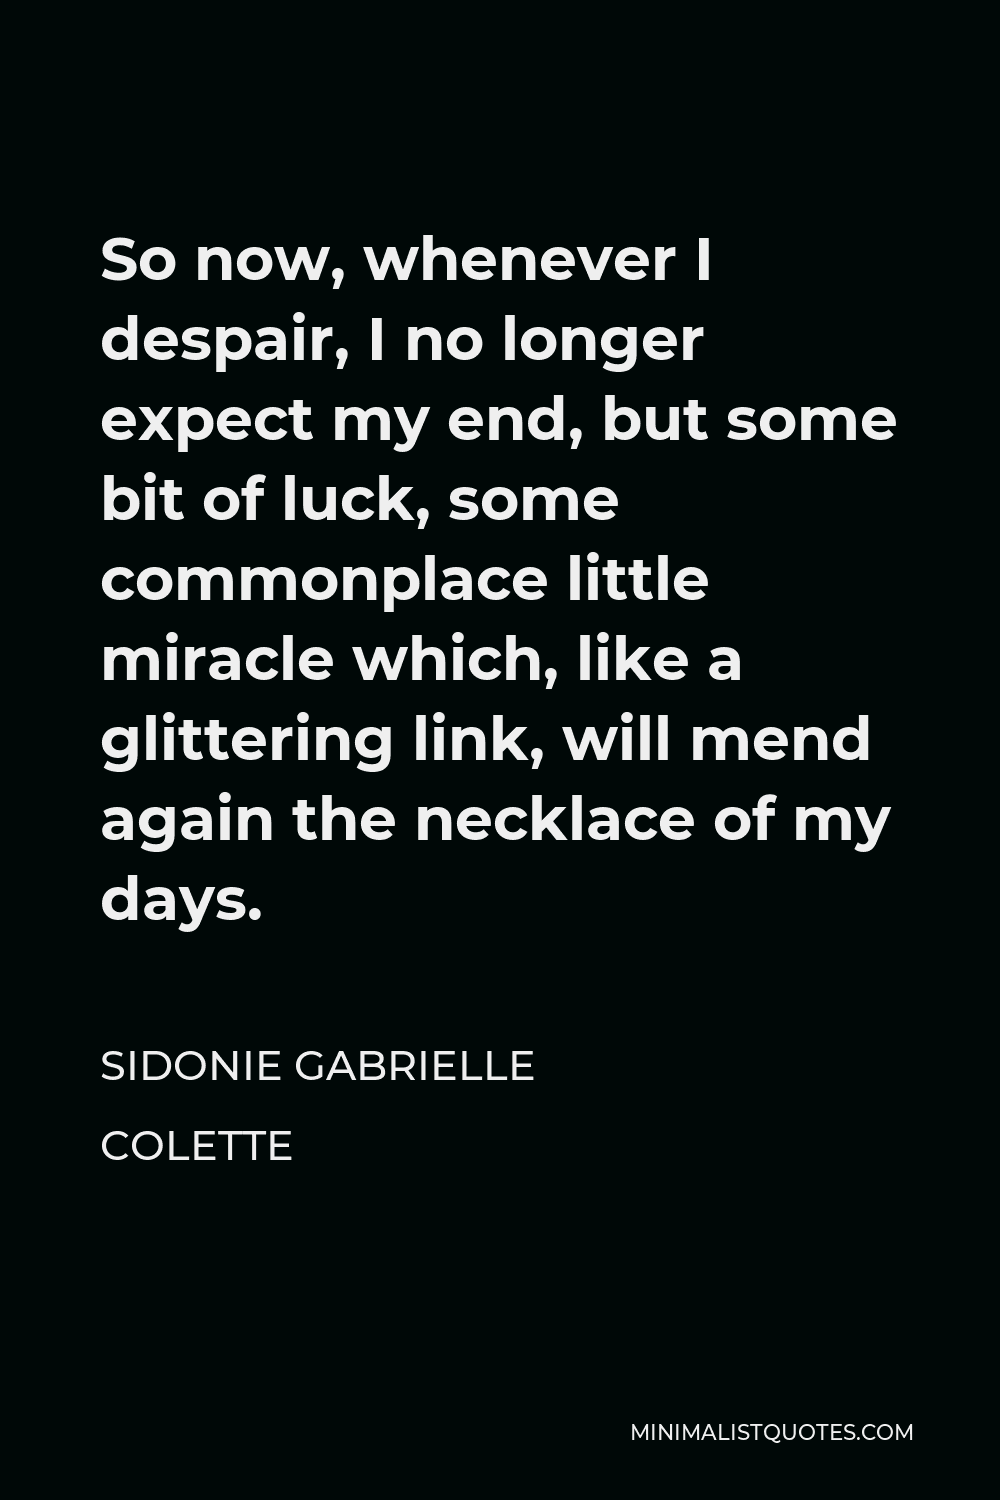 Sidonie Gabrielle Colette Quote - So now, whenever I despair, I no longer expect my end, but some bit of luck, some commonplace little miracle which, like a glittering link, will mend again the necklace of my days.